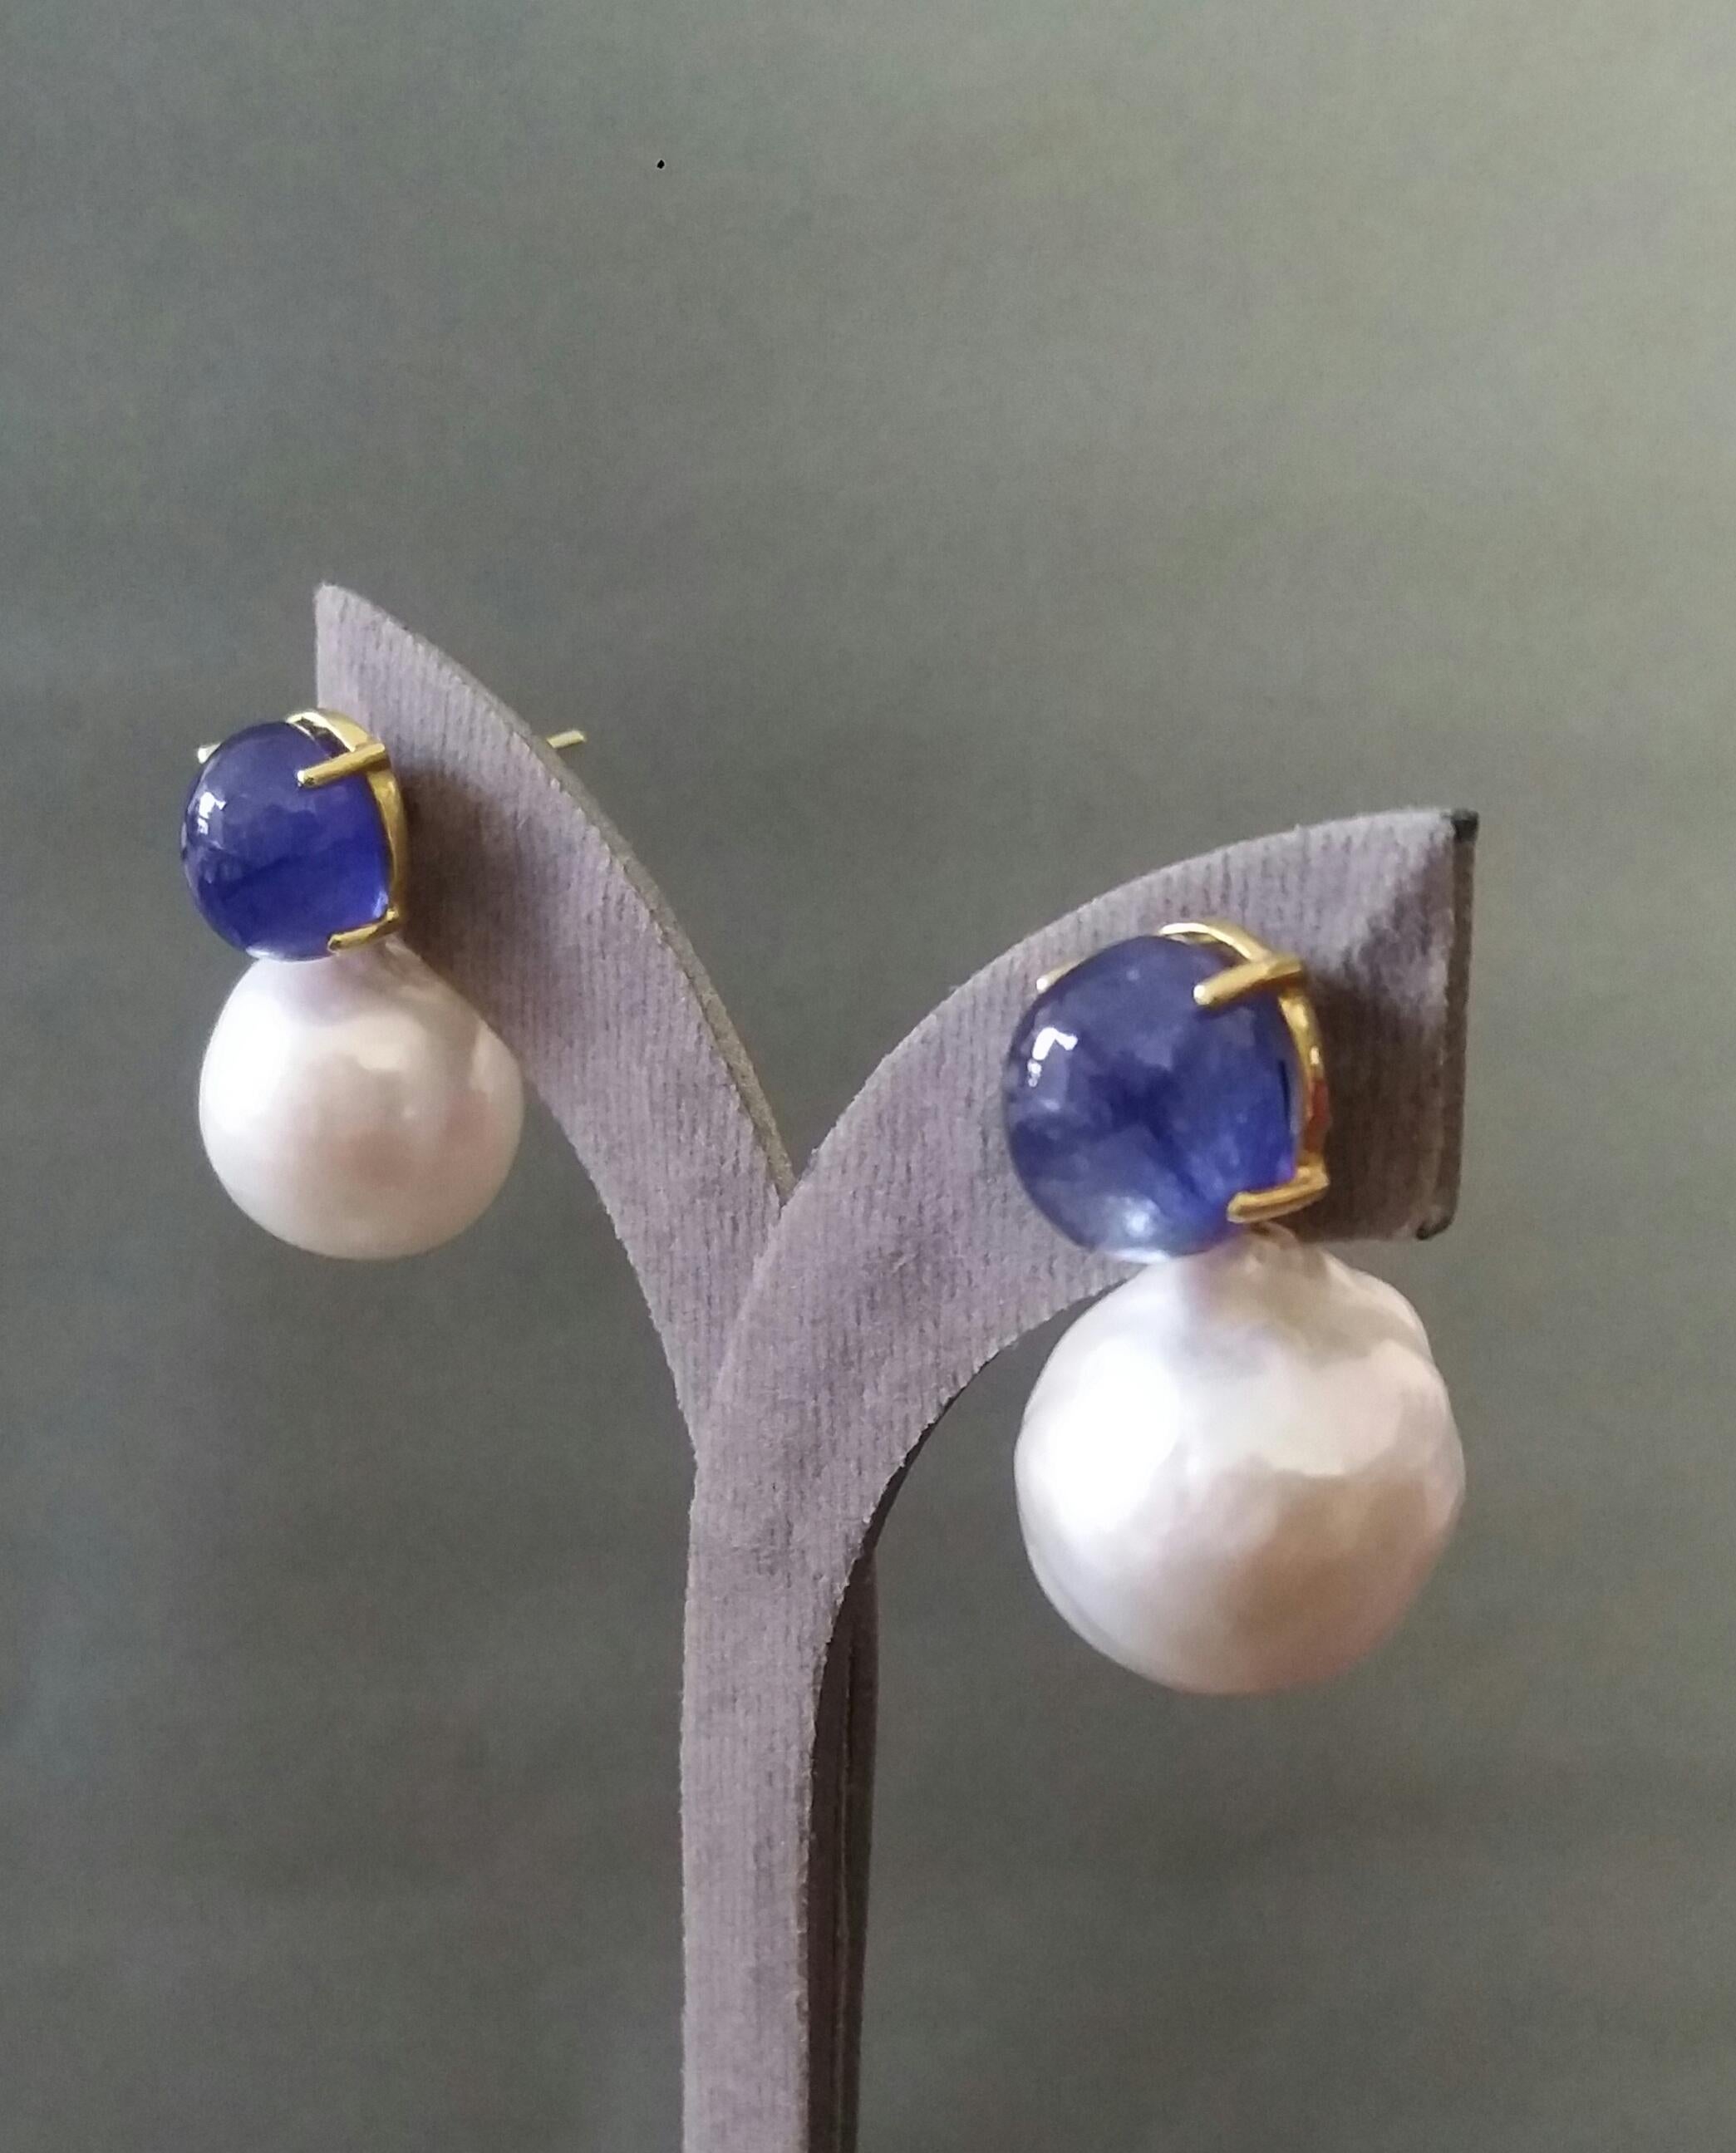 Big Size White Baroque Pearls Oval Blue Sapphires Cabochons Yellow Gold Earrings For Sale 4